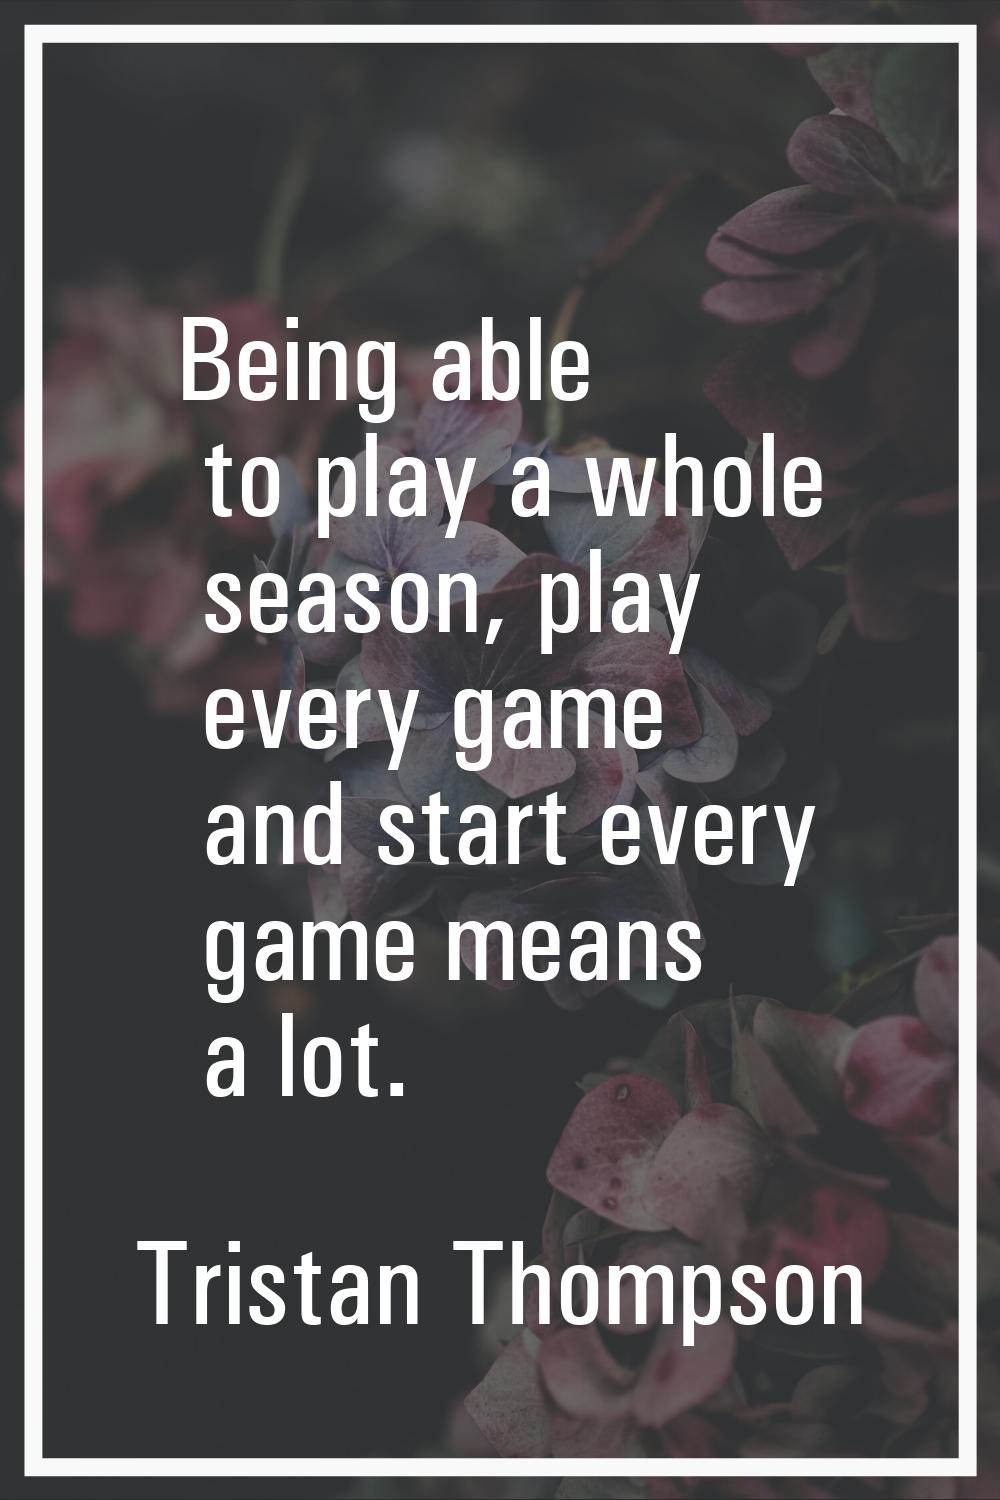 Being able to play a whole season, play every game and start every game means a lot.